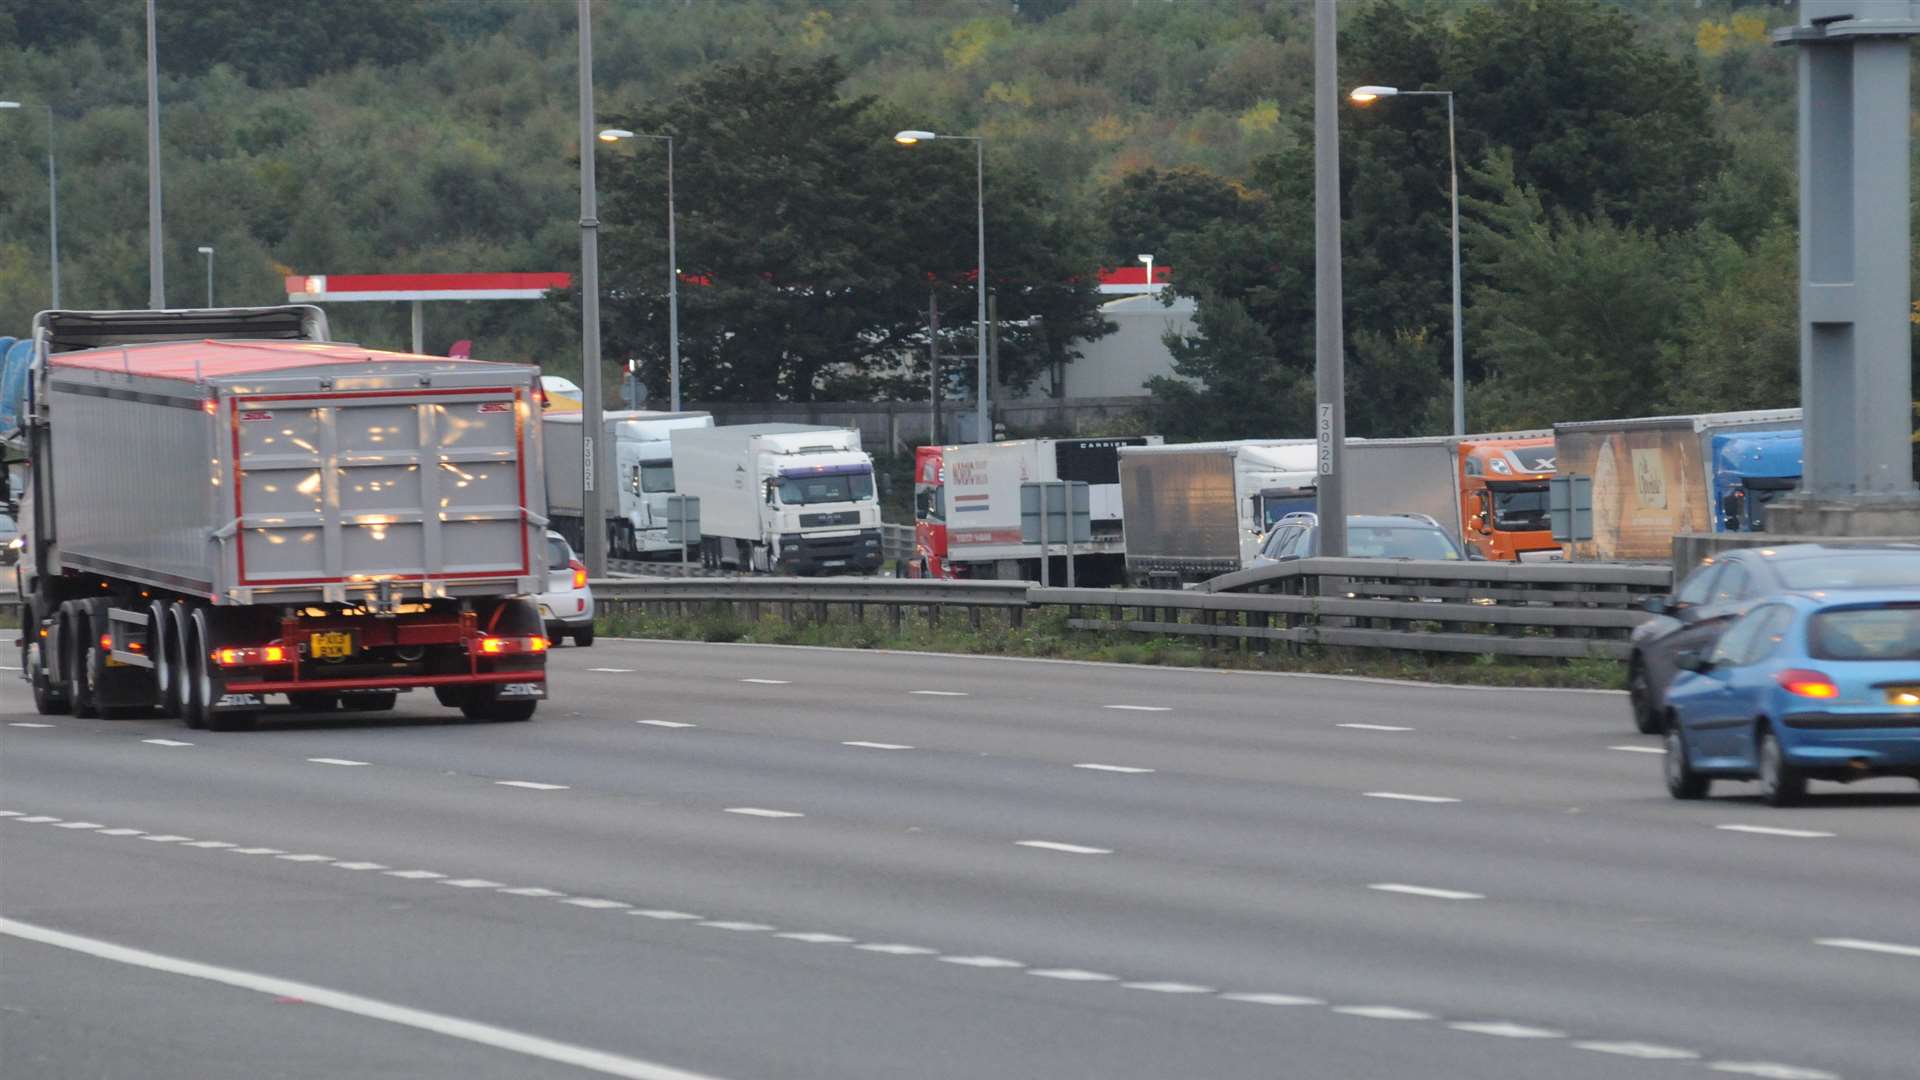 The multi-vehicle crash happened on the A2 between Gravesend and Strood, stock picture.